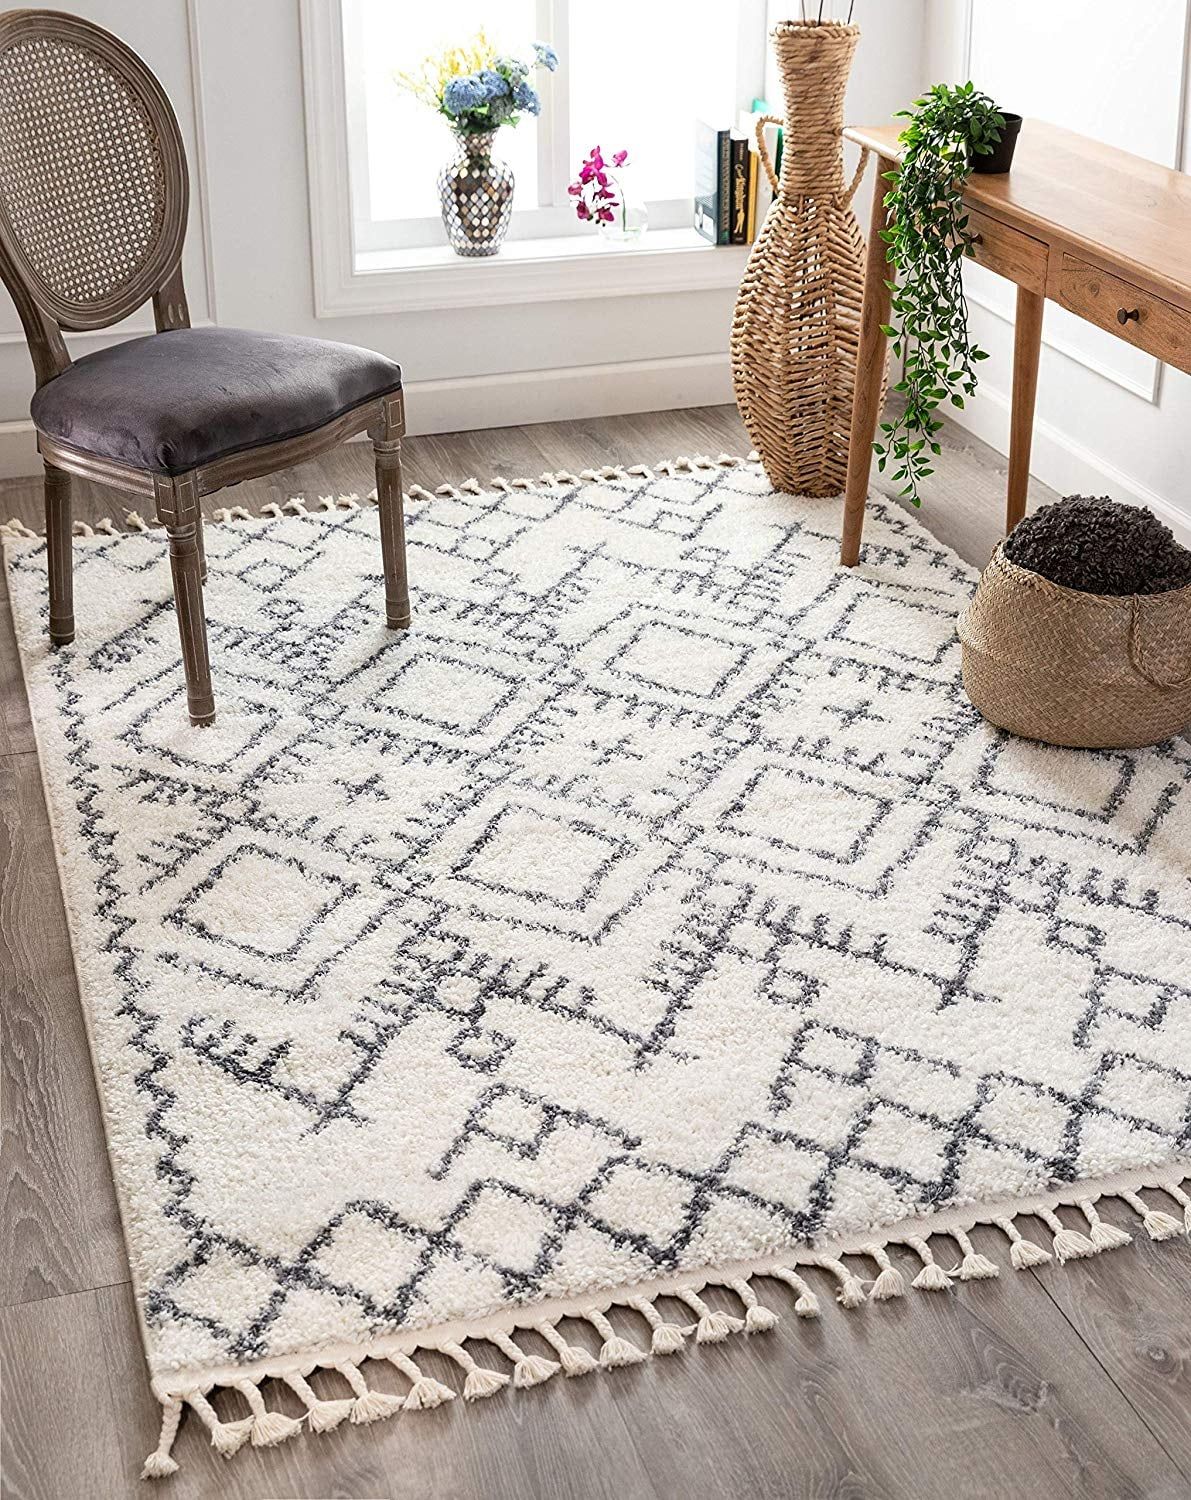 Well Woven Chessa Grey Moroccan Shag Rug | Amazon'S 26 Swankiest Gifts For  Your Favorite Homebody | Popsugar Home Photo 16 With Moroccan Shag Rugs (Photo 8 of 15)